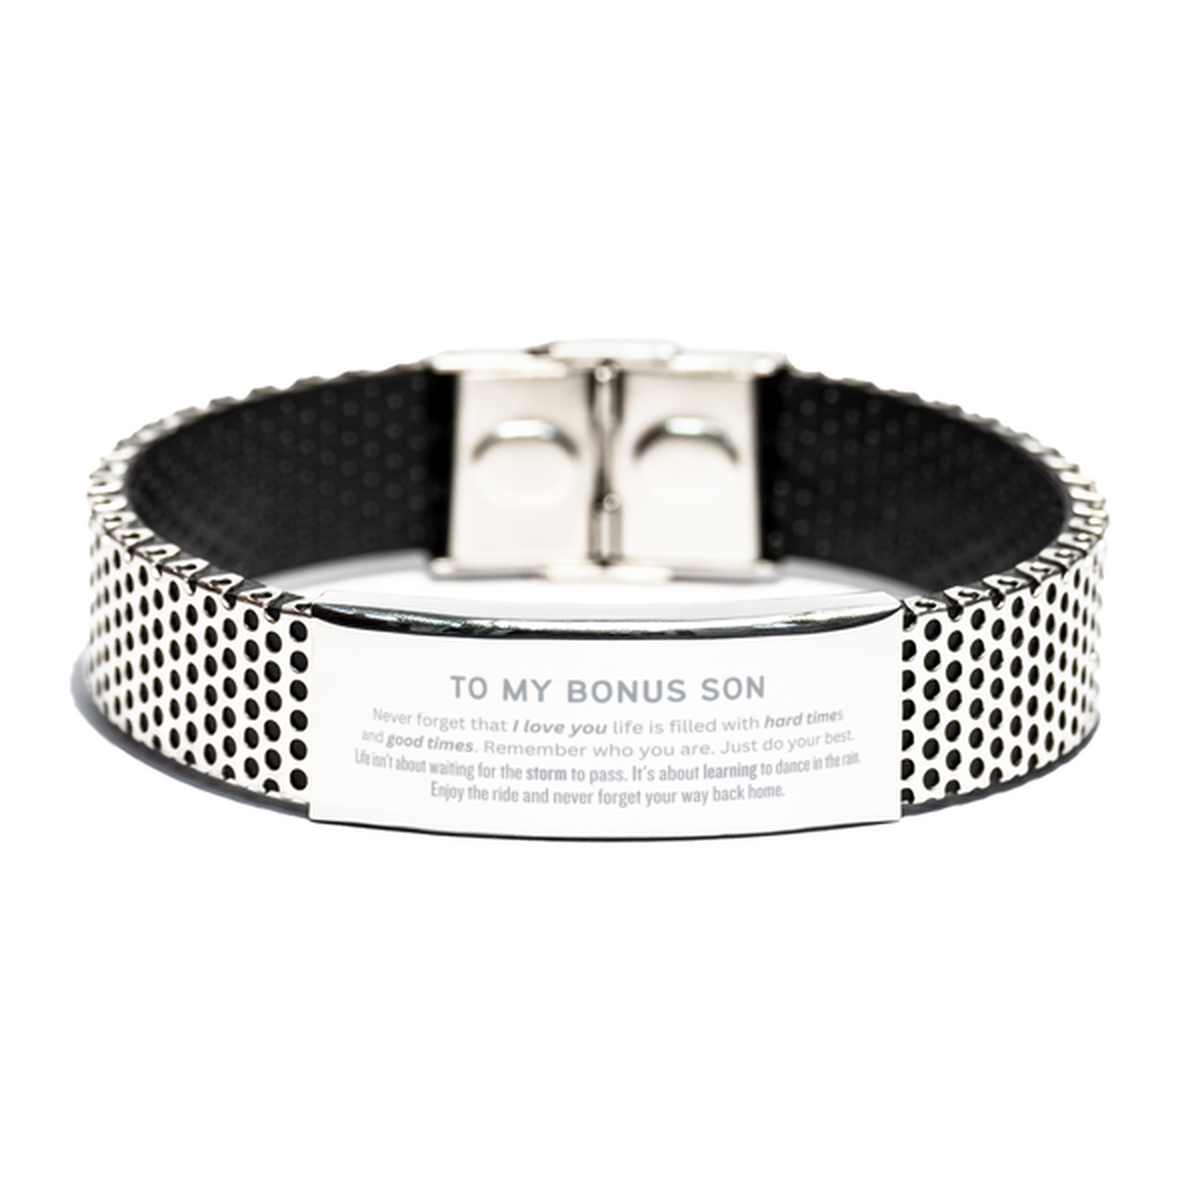 Christmas Bonus Son Stainless Steel Bracelet Gifts, To My Bonus Son Birthday Thank You Gifts For Bonus Son, Graduation Unique Gifts For Bonus Son To My Bonus Son Never forget that I love you life is filled with hard times and good times. Remember who you